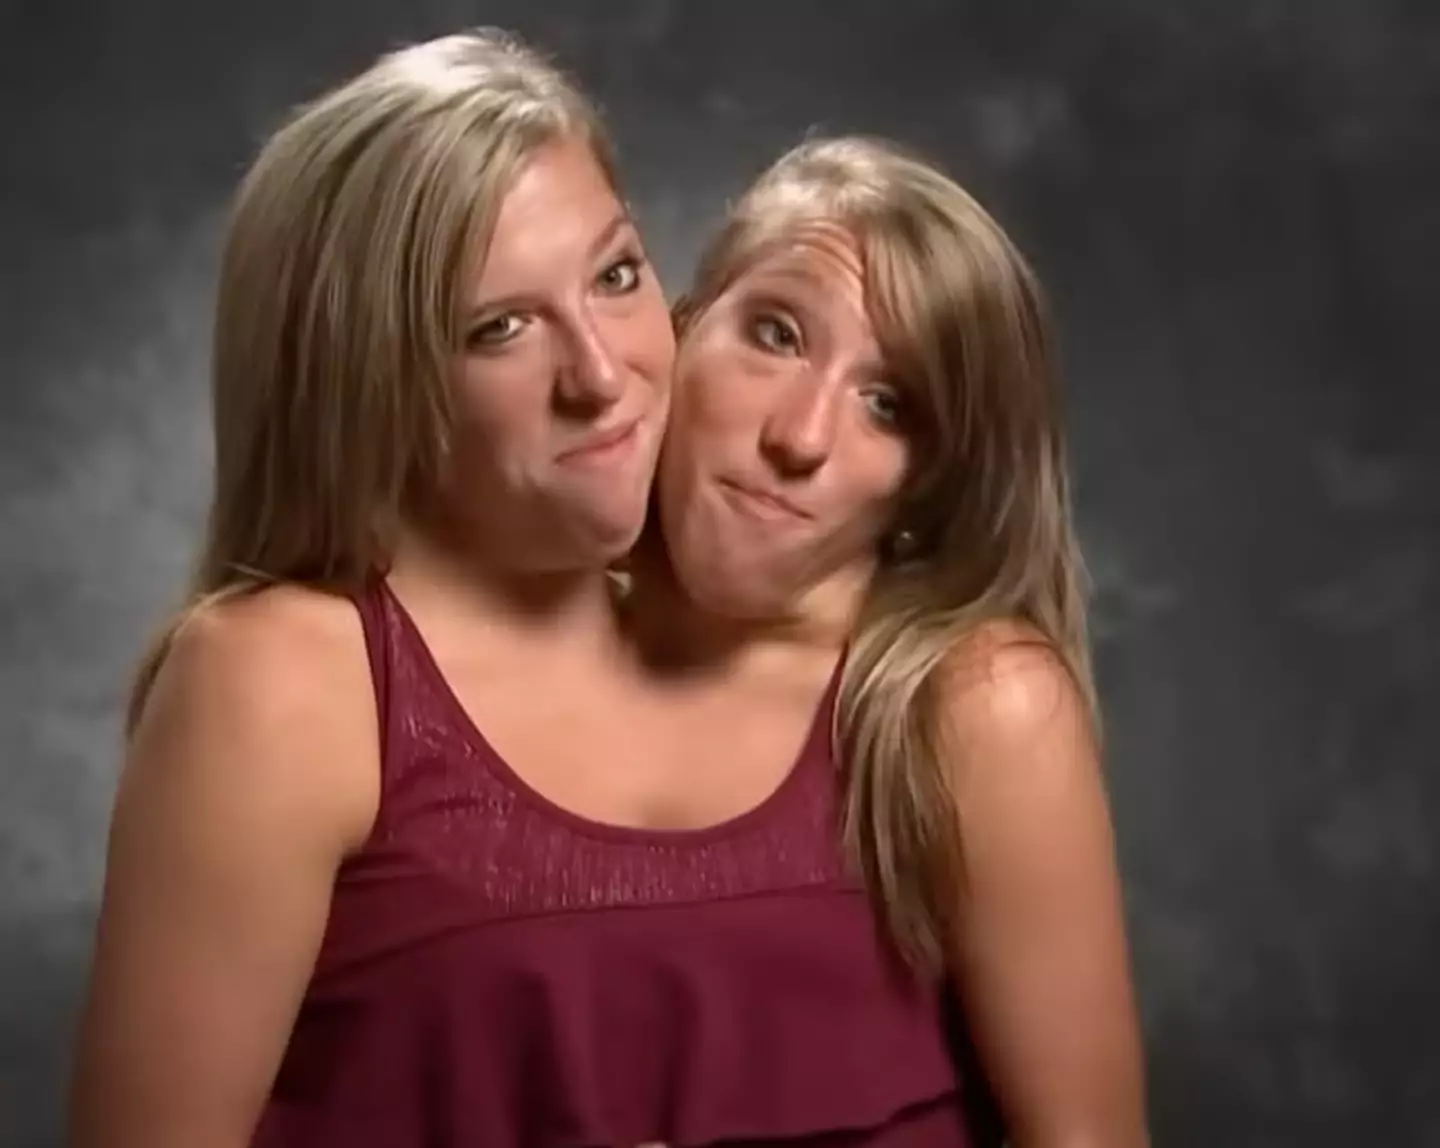 Conjoined twins Abby and Brittany work as teachers, but only get paid one salary.